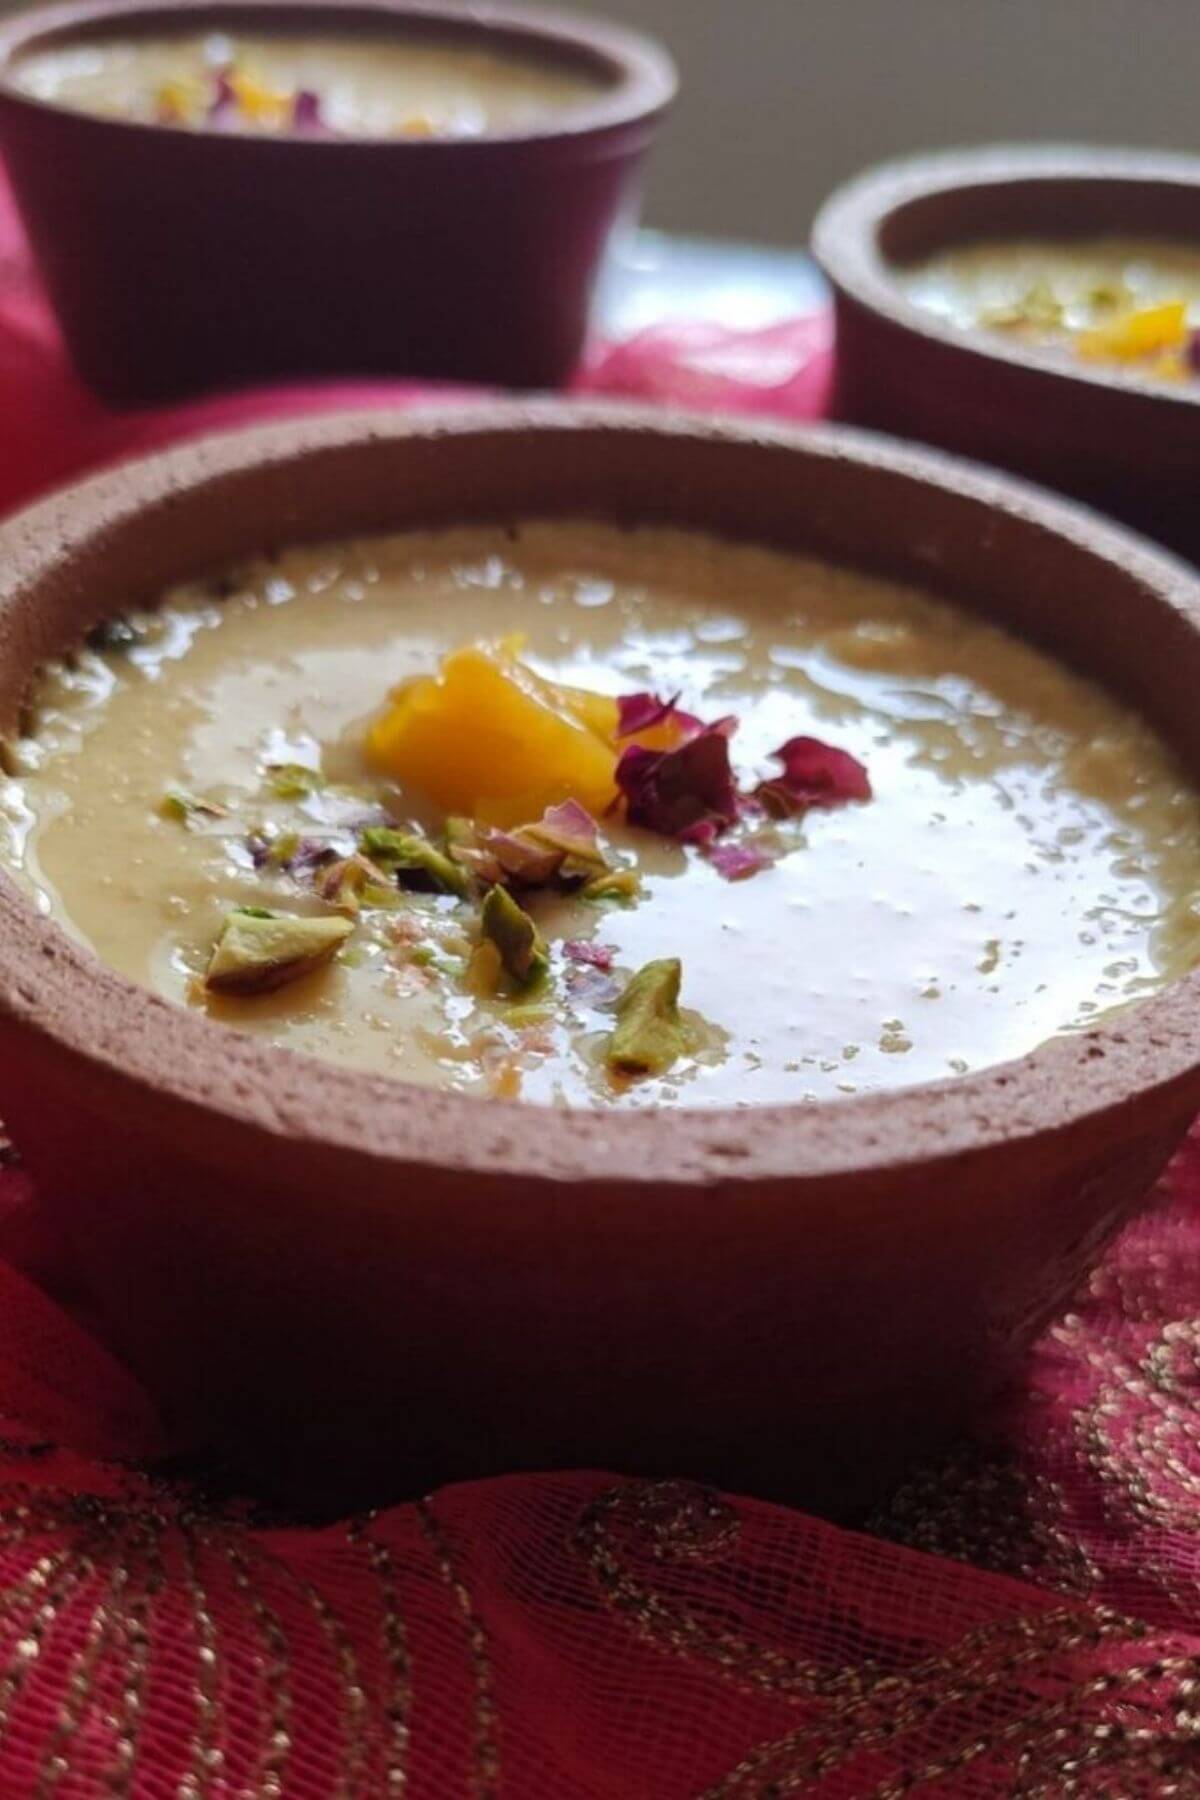 Mango phirni garnished with chopped mango, rose petals, and nuts served in an earthen pot